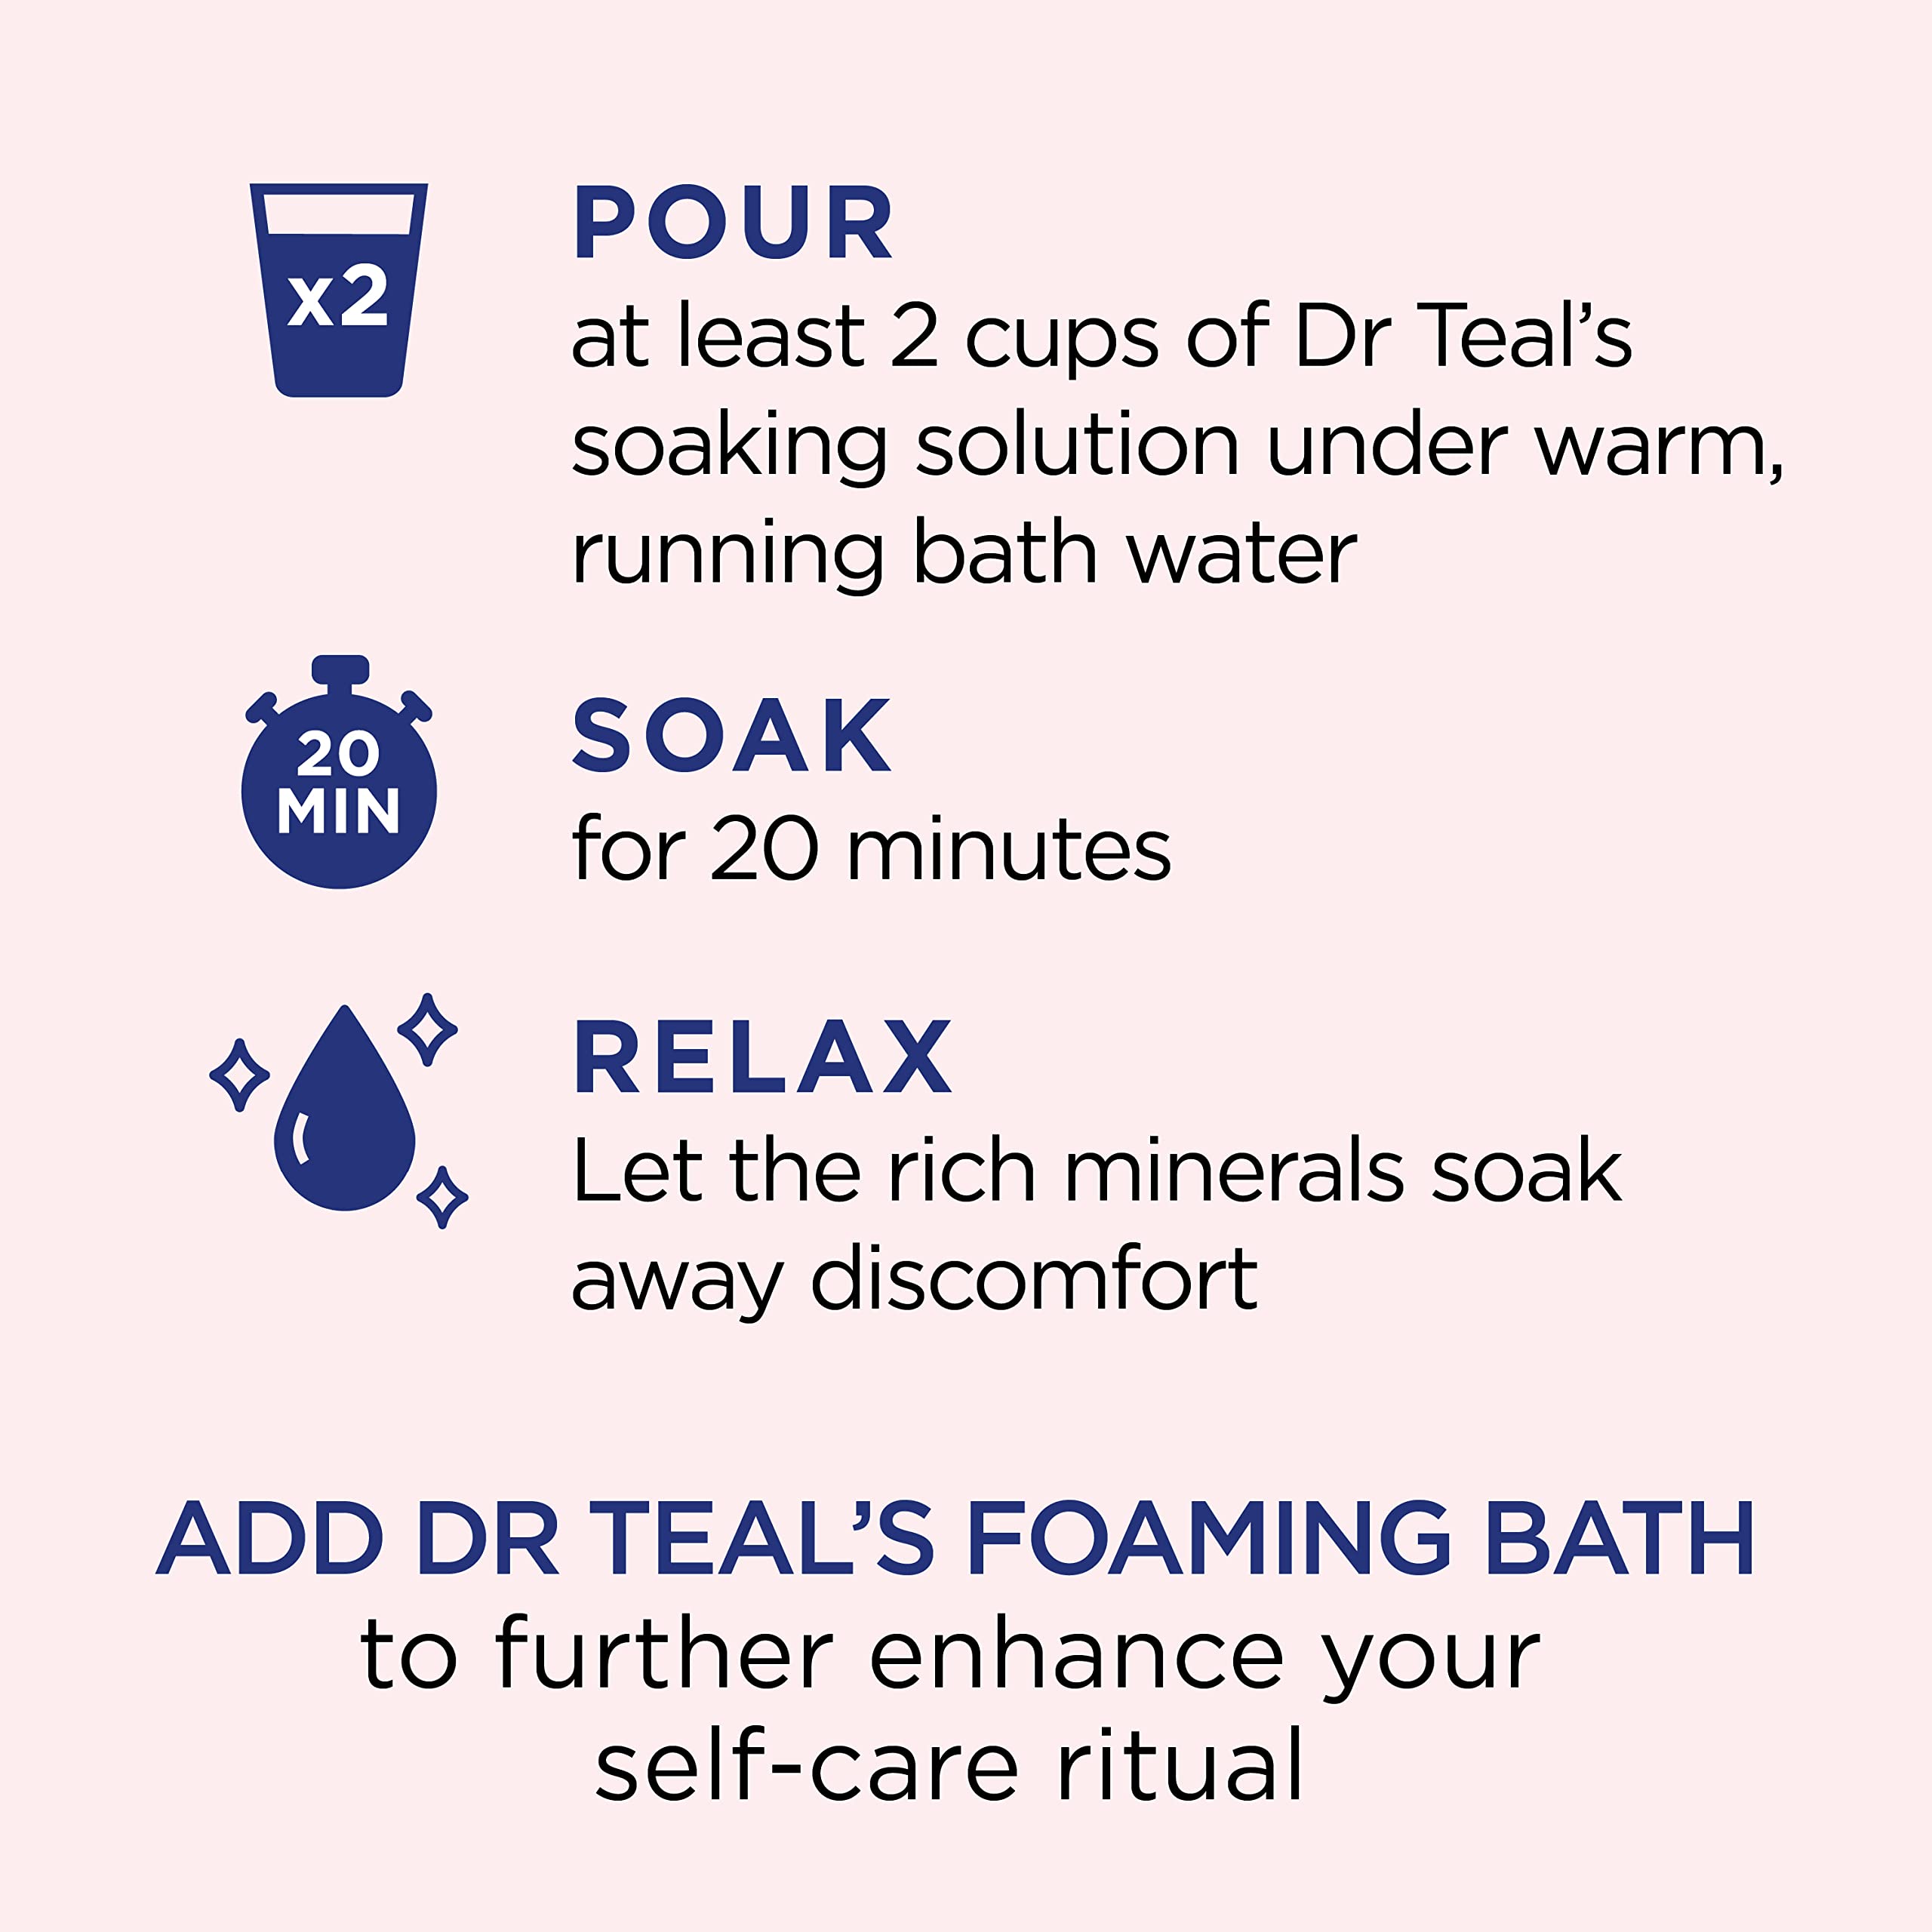 Dr Teal's Pink Himalayan Mineral Soak, Restore & Replenish with Pure Epsom Salt, 3 lbs (Packaging May Vary)